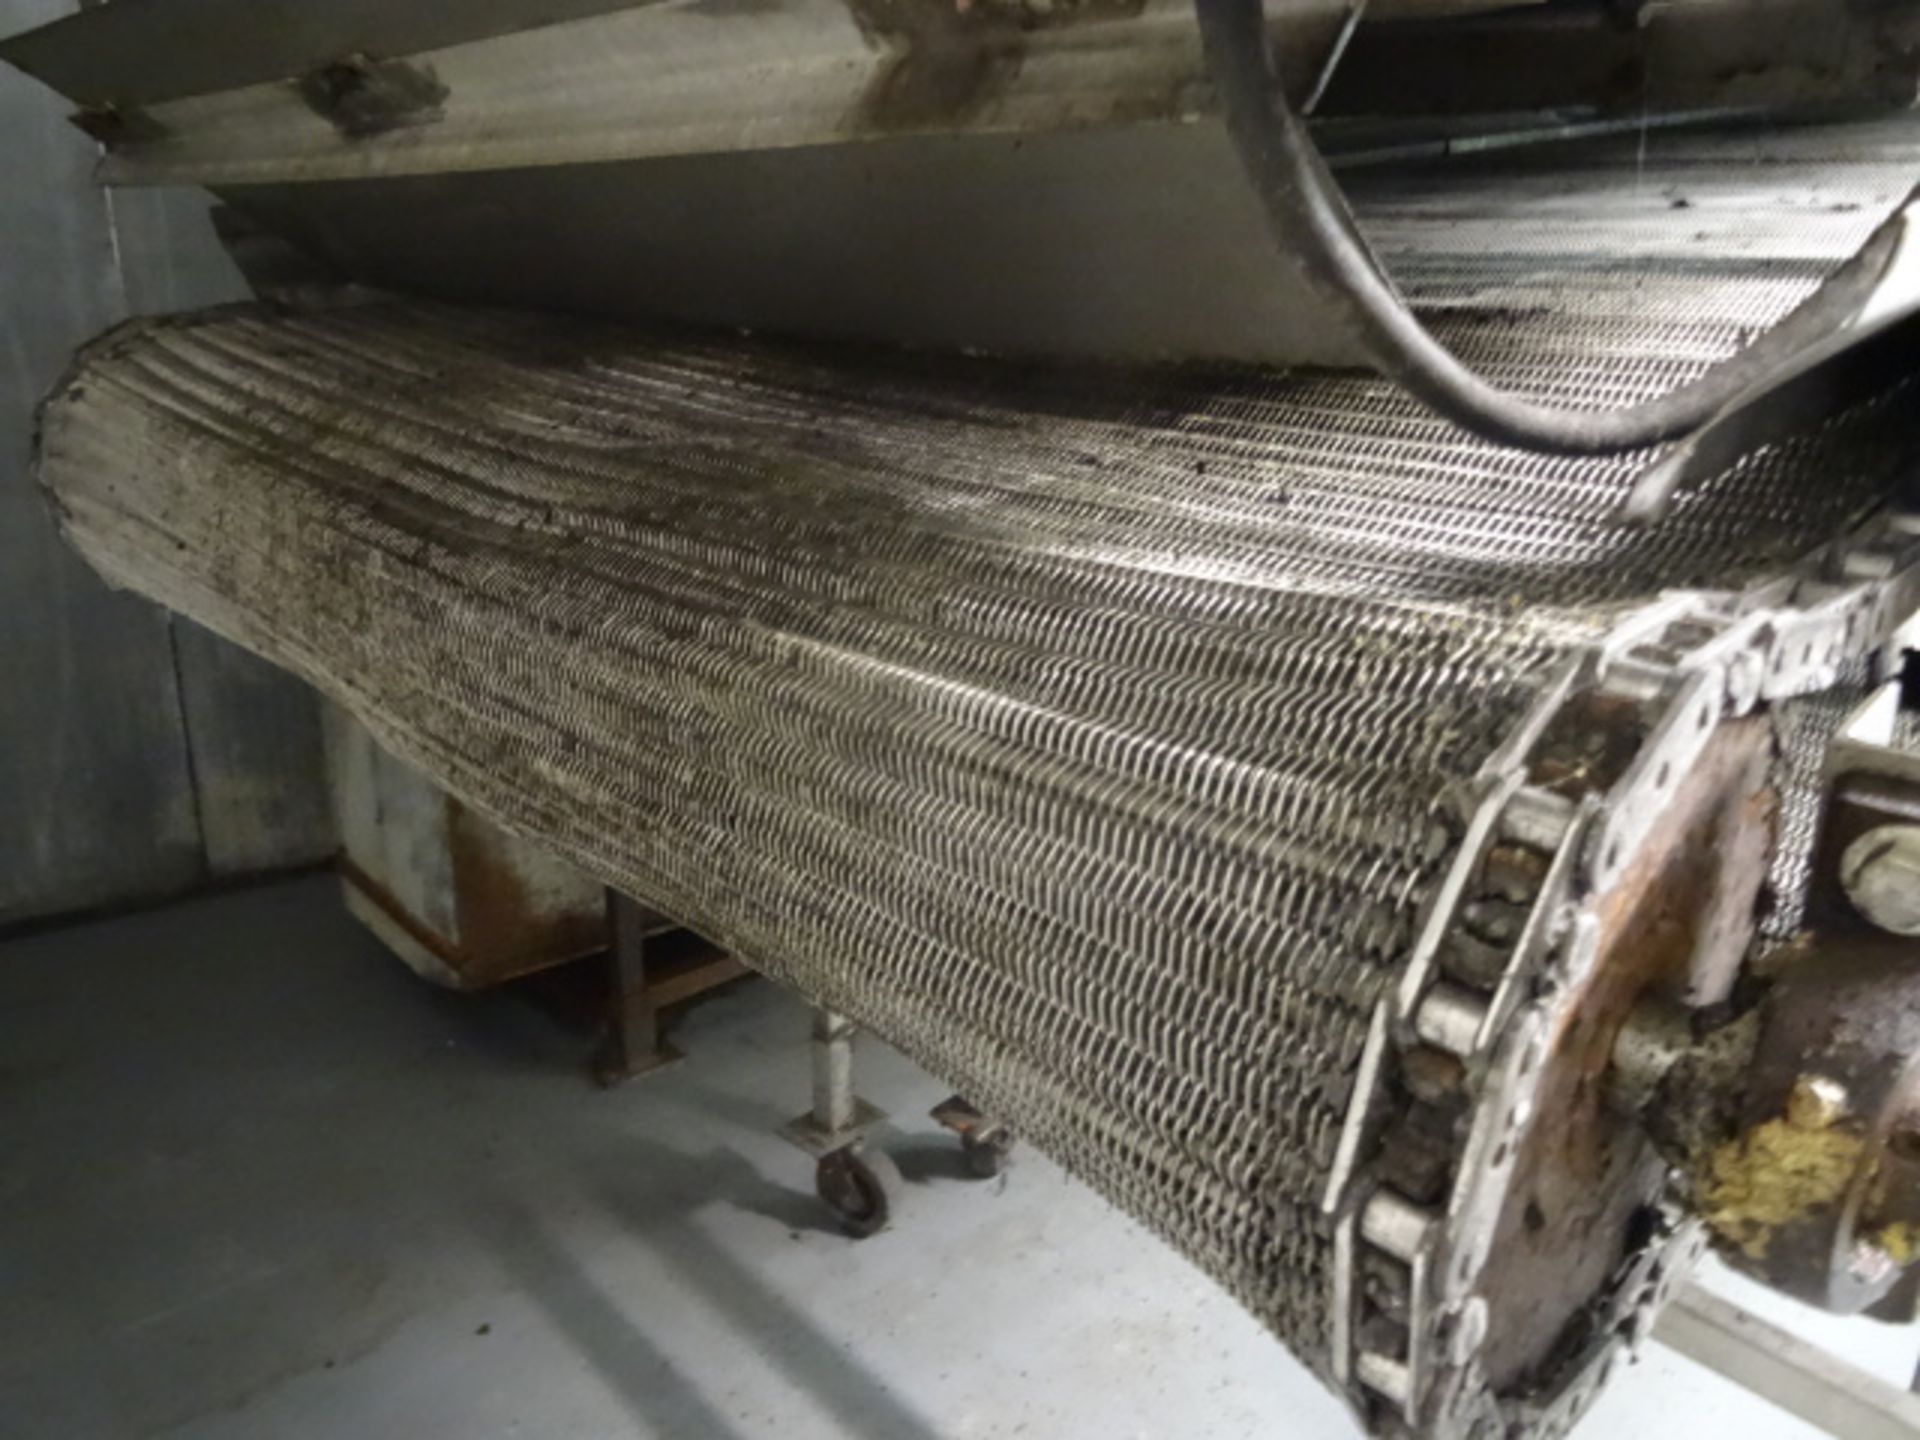 1x, 28' x 48" S/S Conveyor w/ 5 Level Cooling Conveyor System - Image 3 of 10